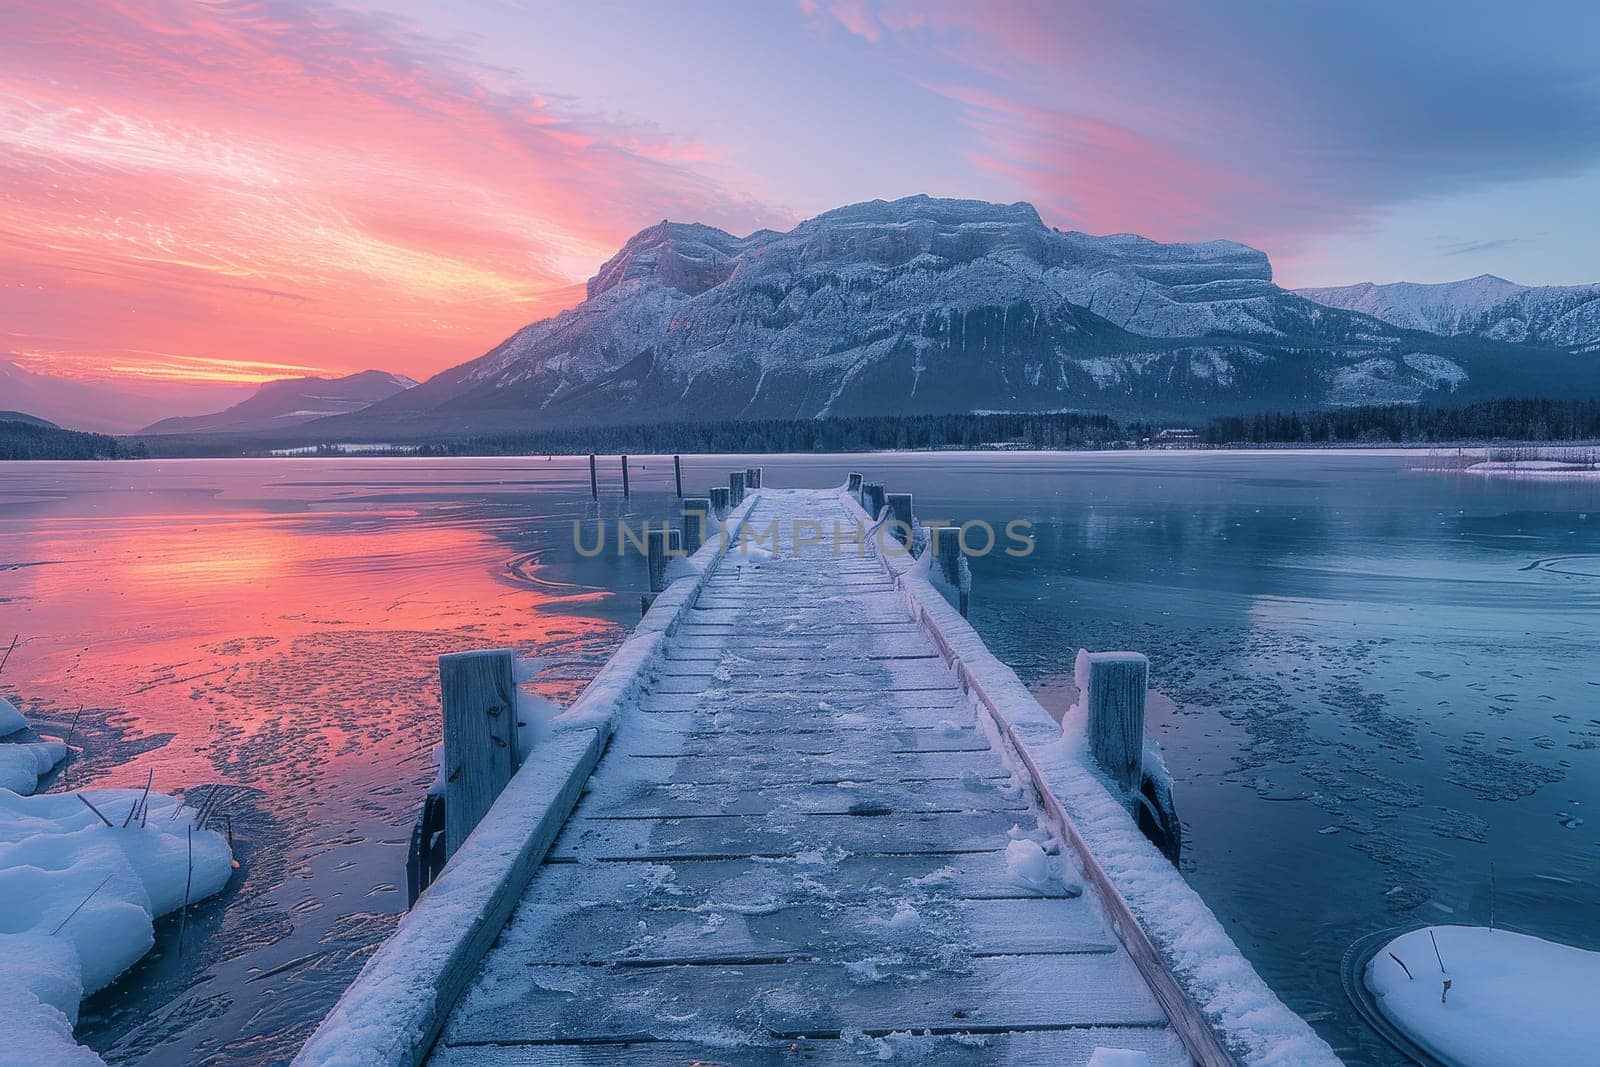 A wooden pier is in front of a mountain range. The water is calm and the sky is pink